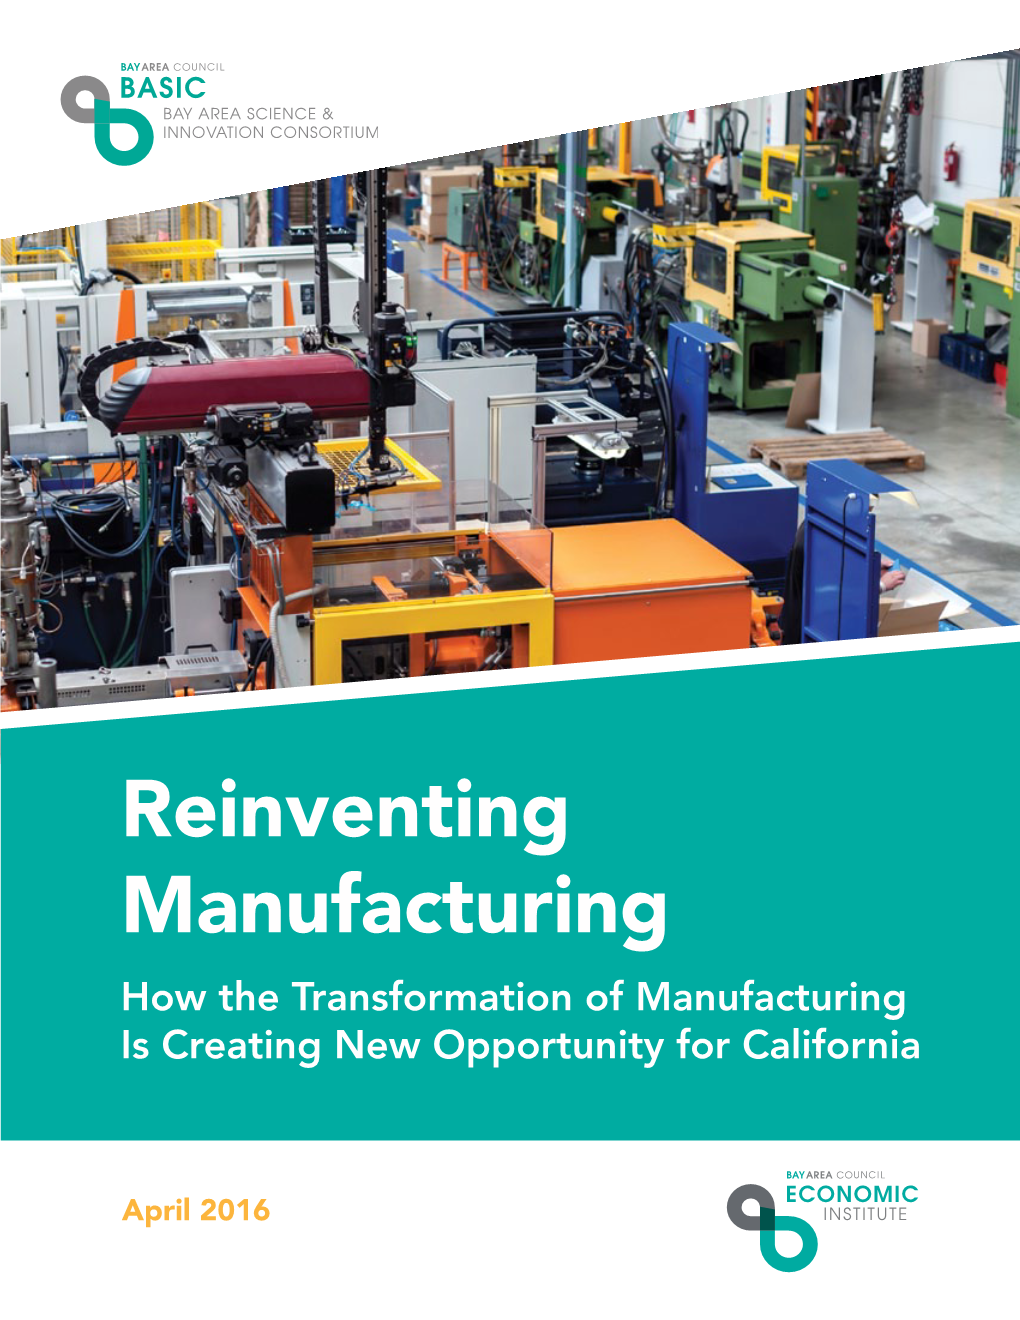 Reinventing Manufacturing How the Transformation of Manufacturing Is Creating New Opportunity for California